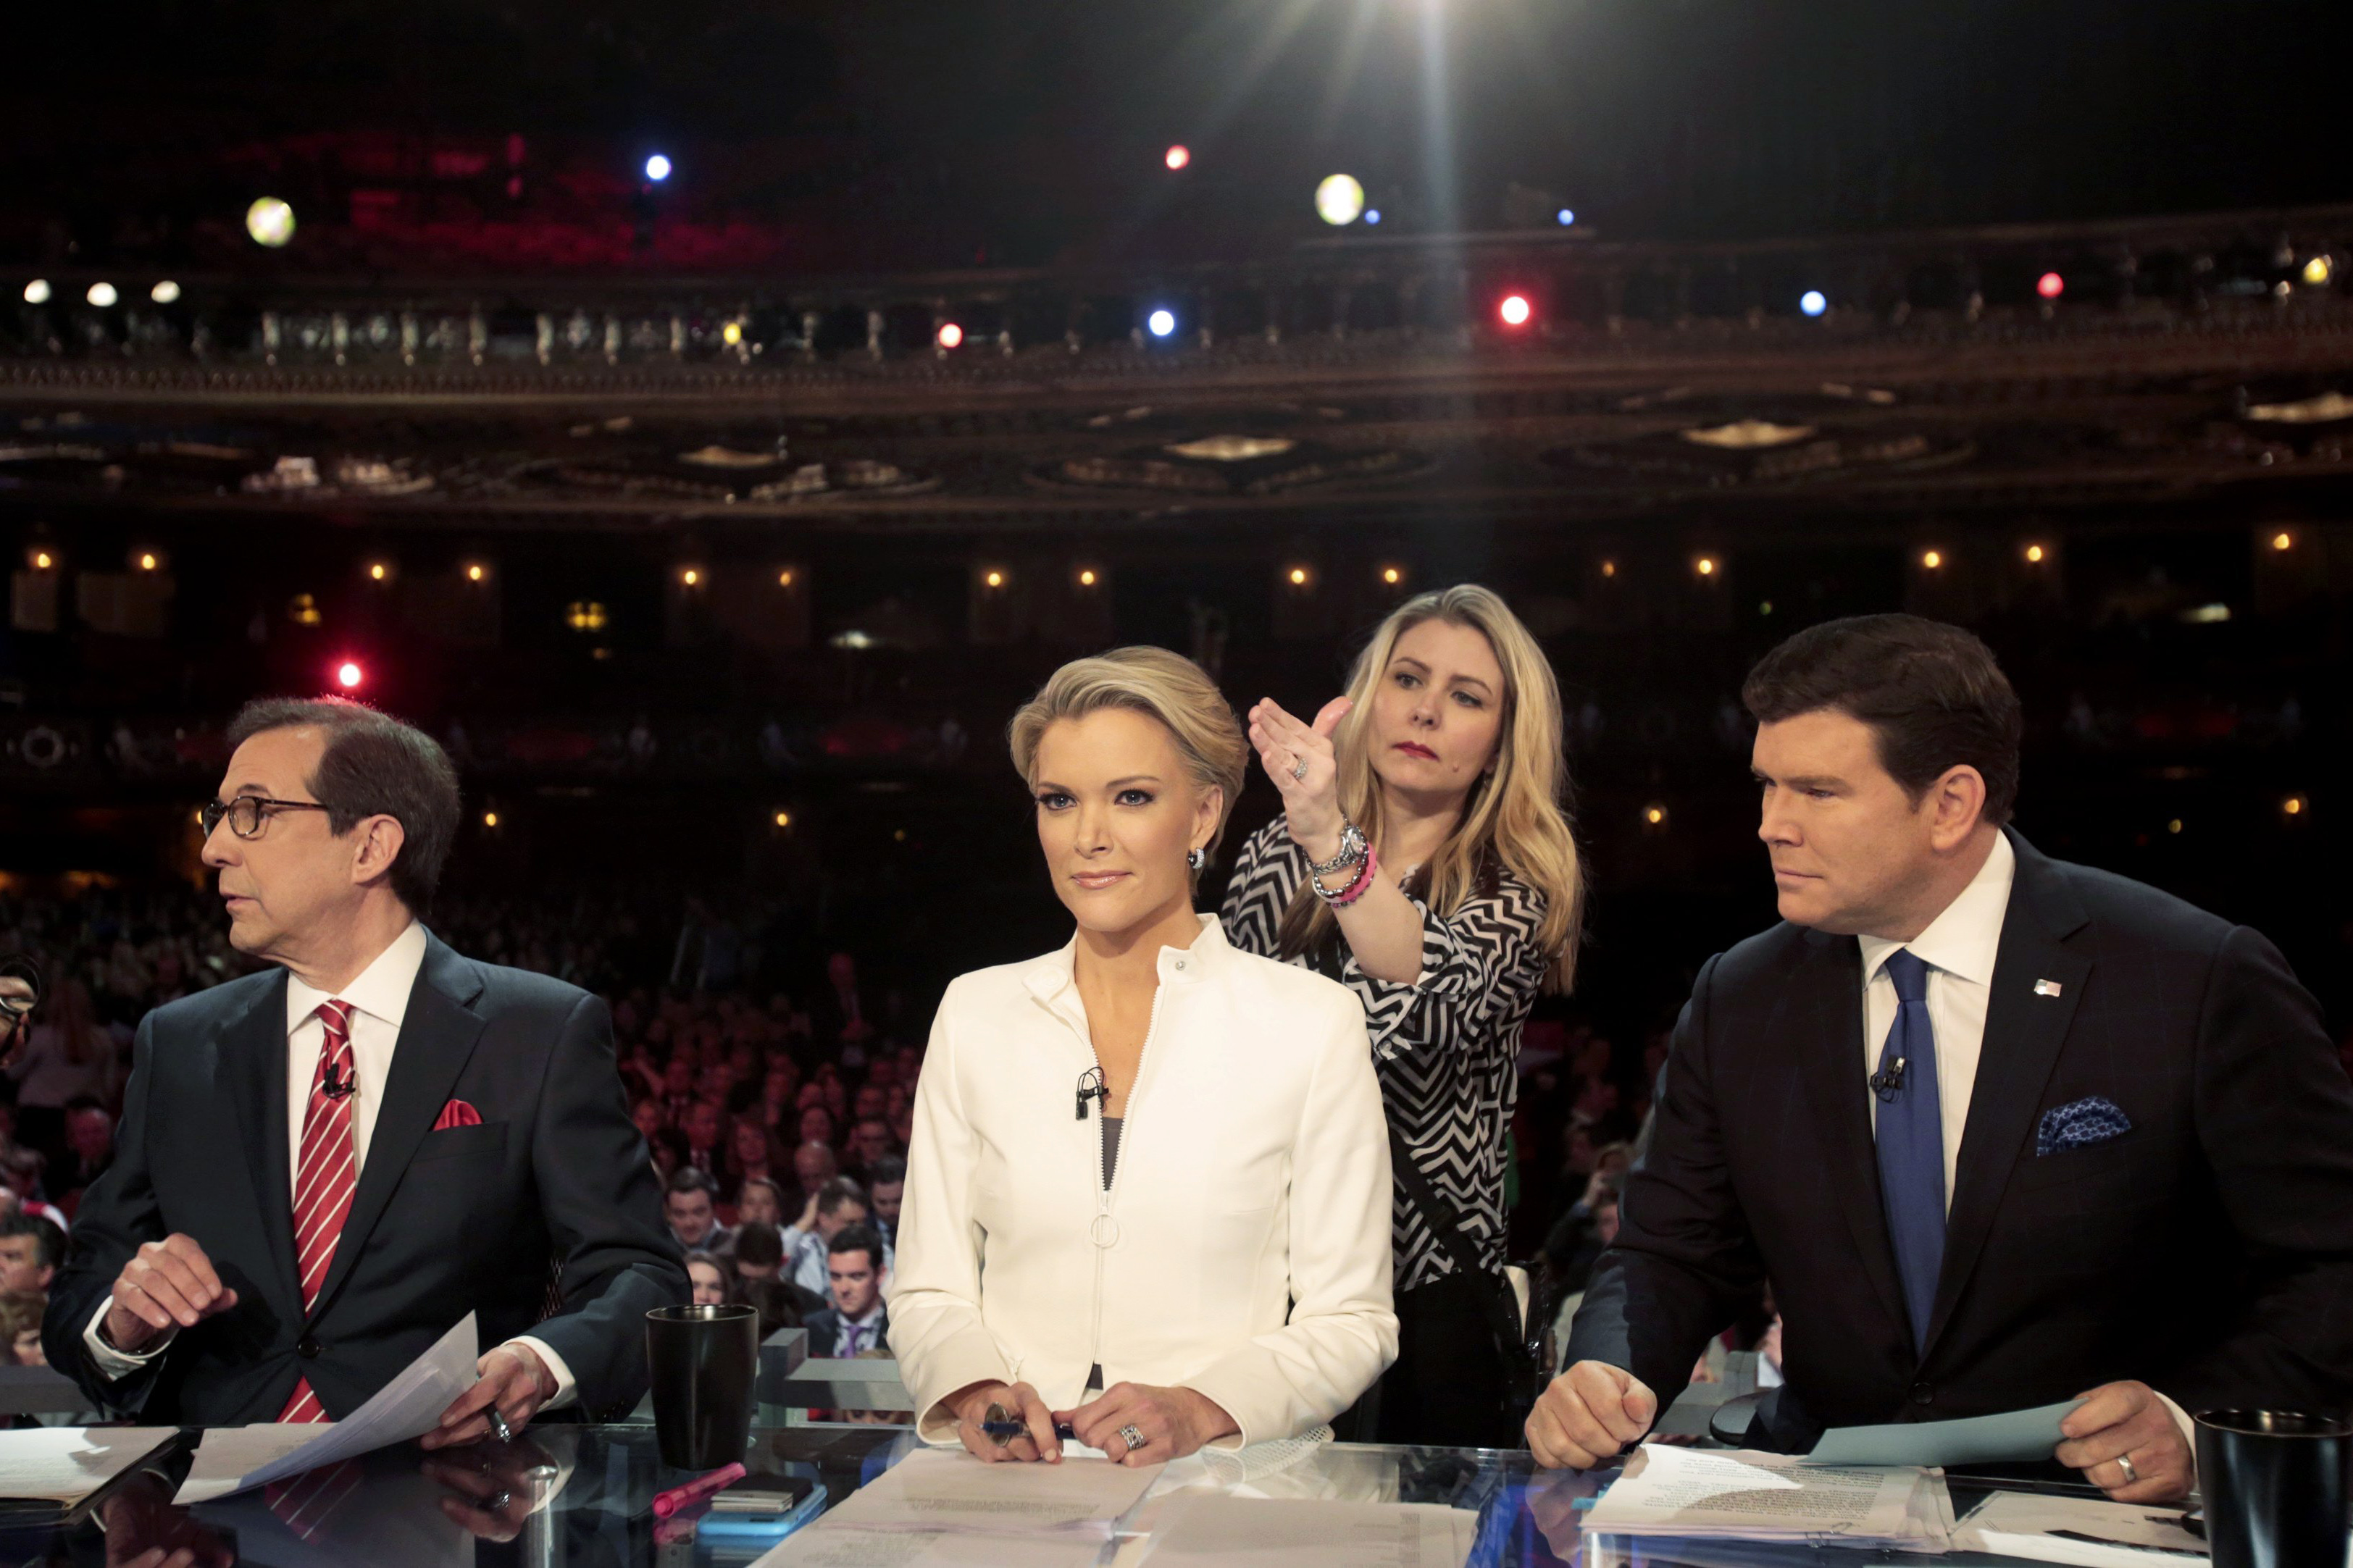 Fox News Channel anchors, from left, Chris Wallace, Megyn Kelly and Bret Baier moderate a debate in Detroit, on March 3. (Rebecca Cook—Reuters)